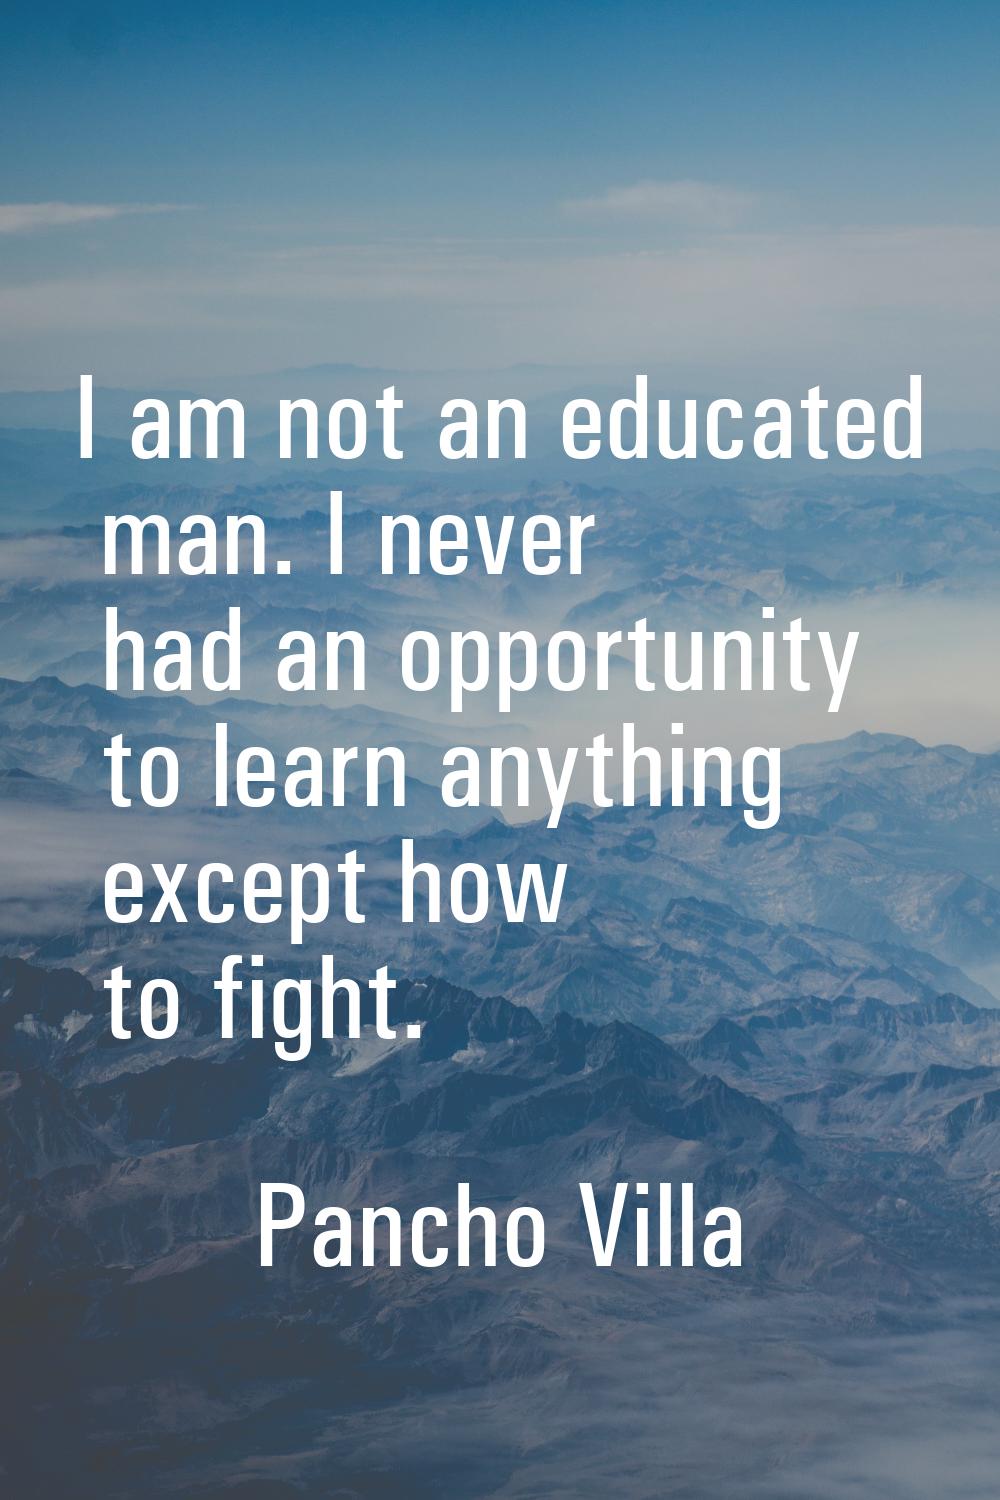 I am not an educated man. I never had an opportunity to learn anything except how to fight.